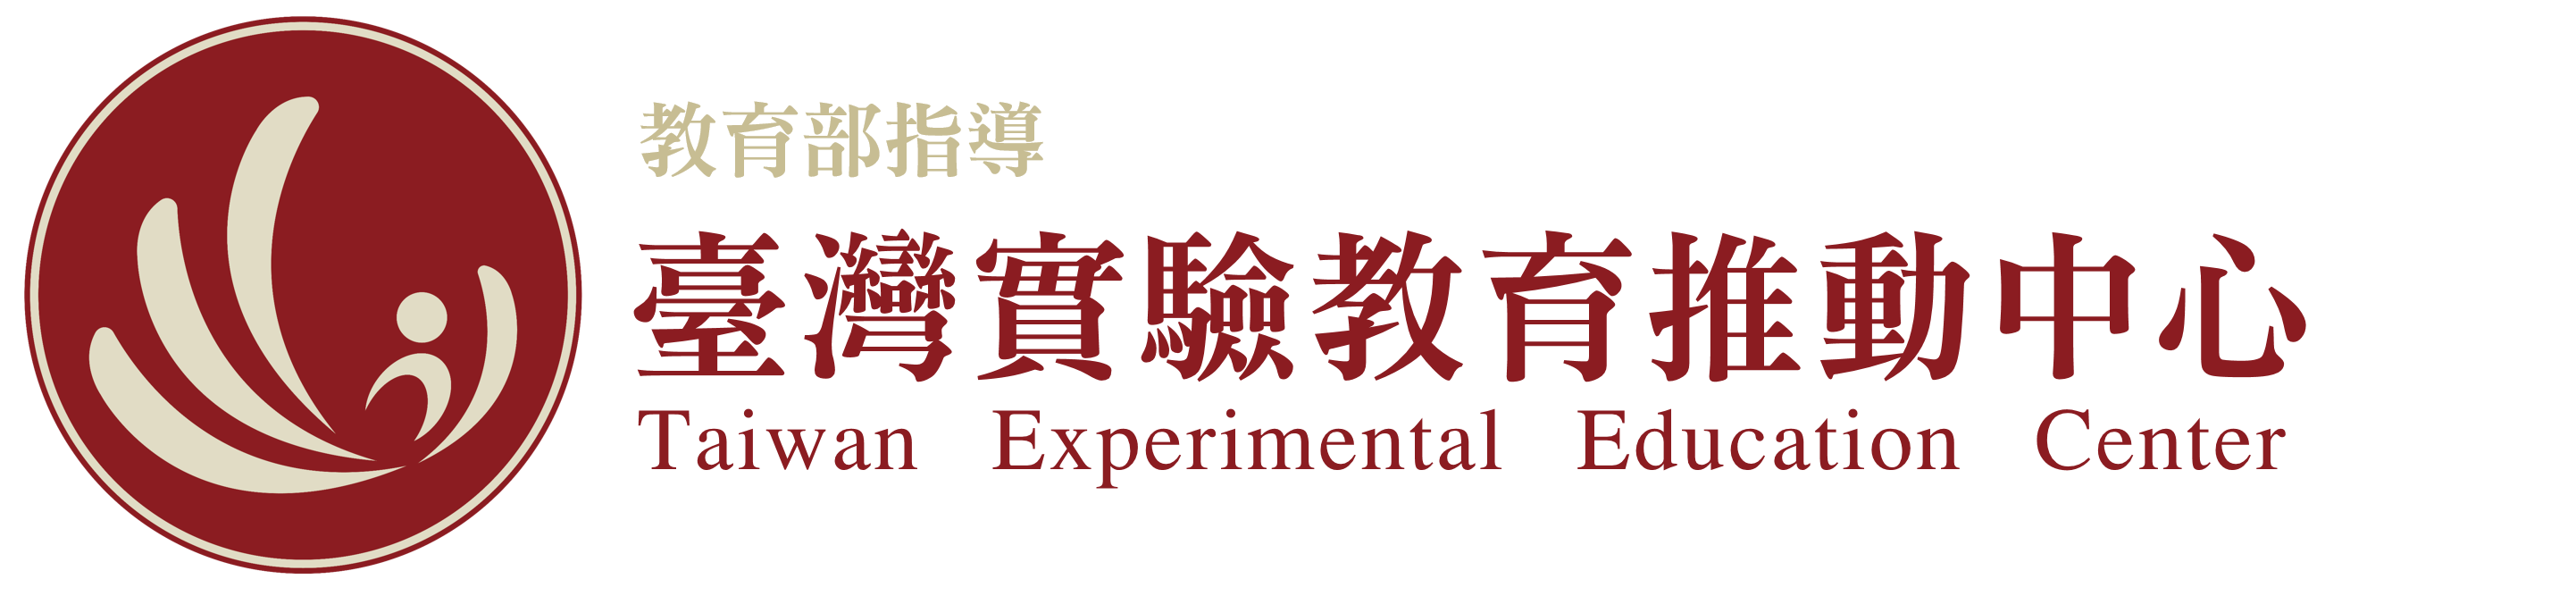 2018 International Conference on Experimental Education 